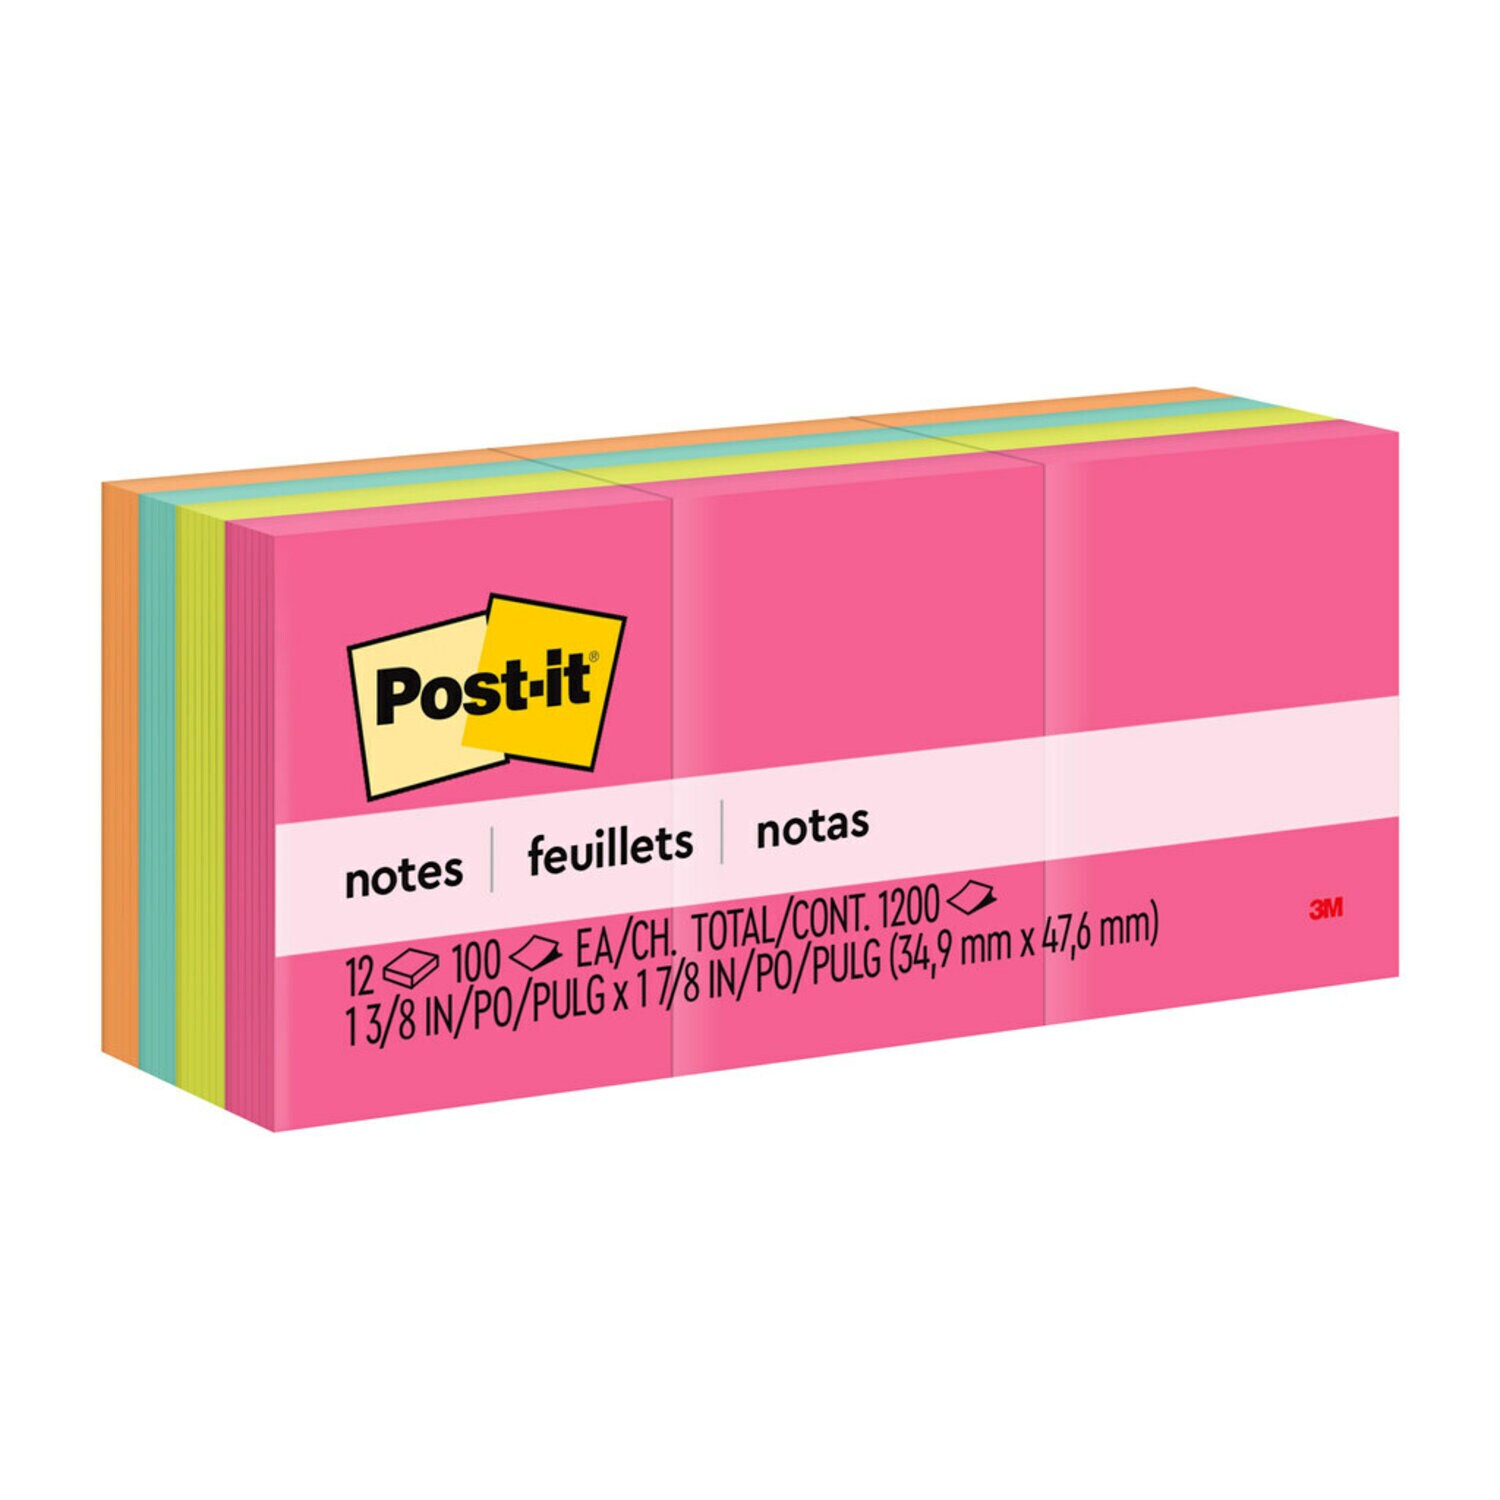 7100244975 - Post-it Notes 653AN, 1 3/8 in x 1 7/8 in (34.9 mm x 47.6 mm), Poptimistic Collection